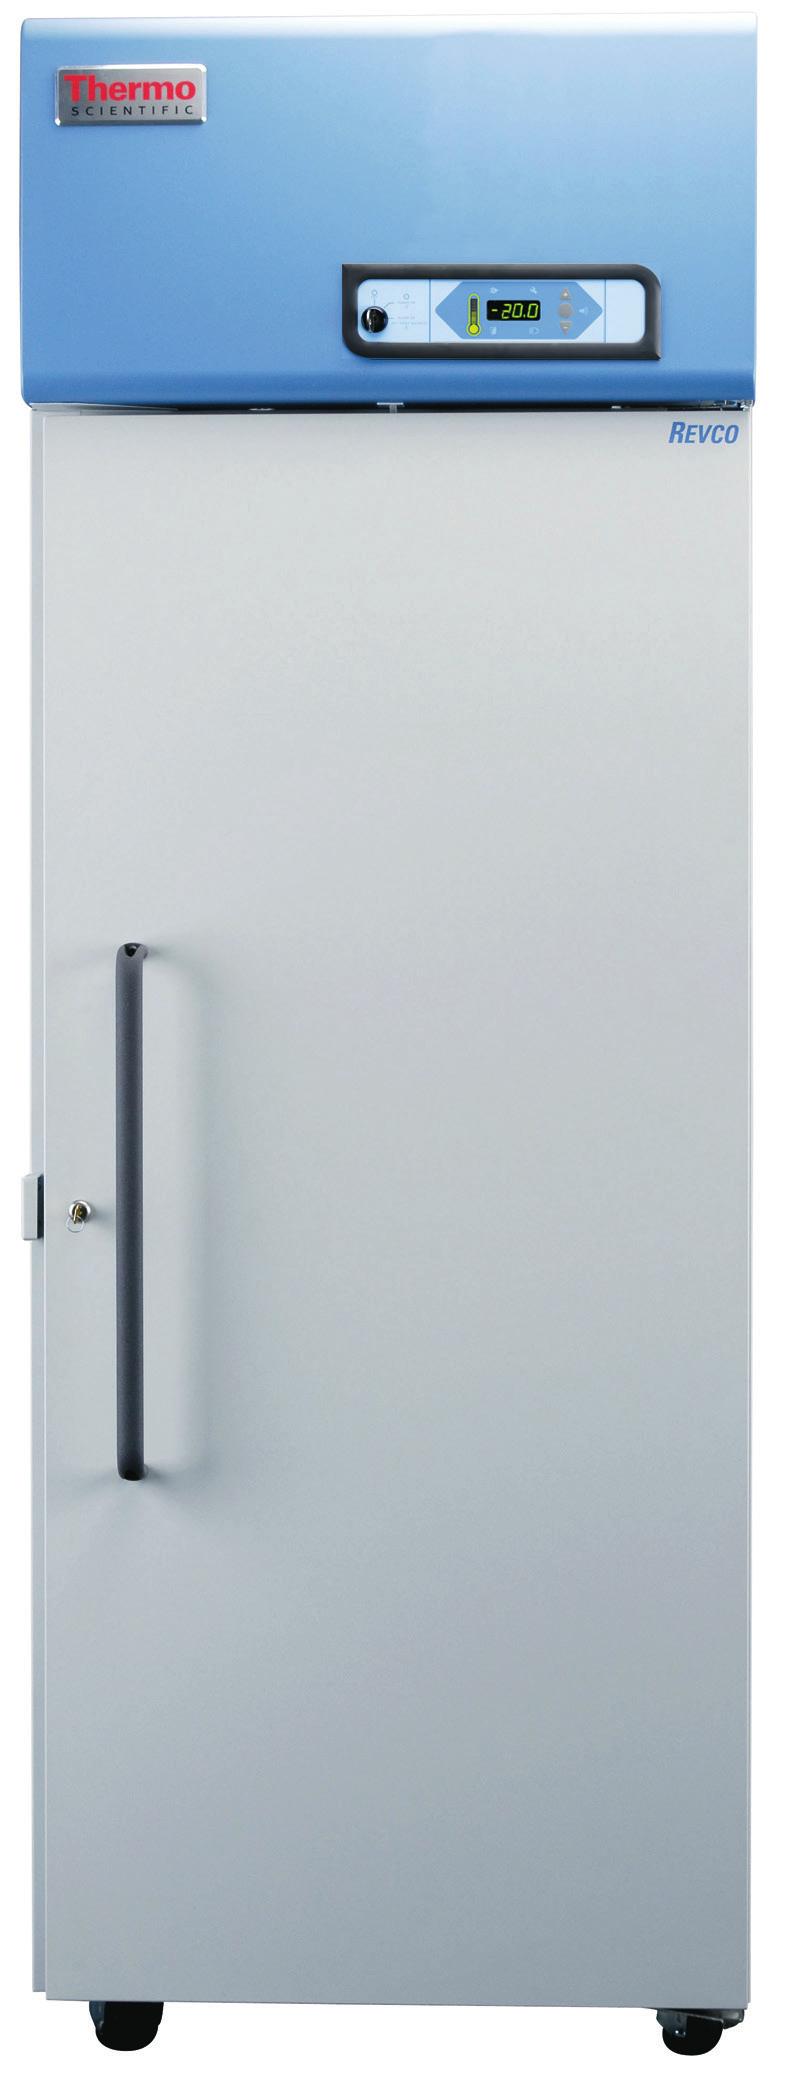 4Offer Now Thermo Scientific high-performance, manual defrost freezer (30 cu. ft.) at a special promotional price. for a limited time, purchase a 30 cu. ft. Revco -20 C high-performance, manual defrost freezer for a special, promotional price of $4,999.